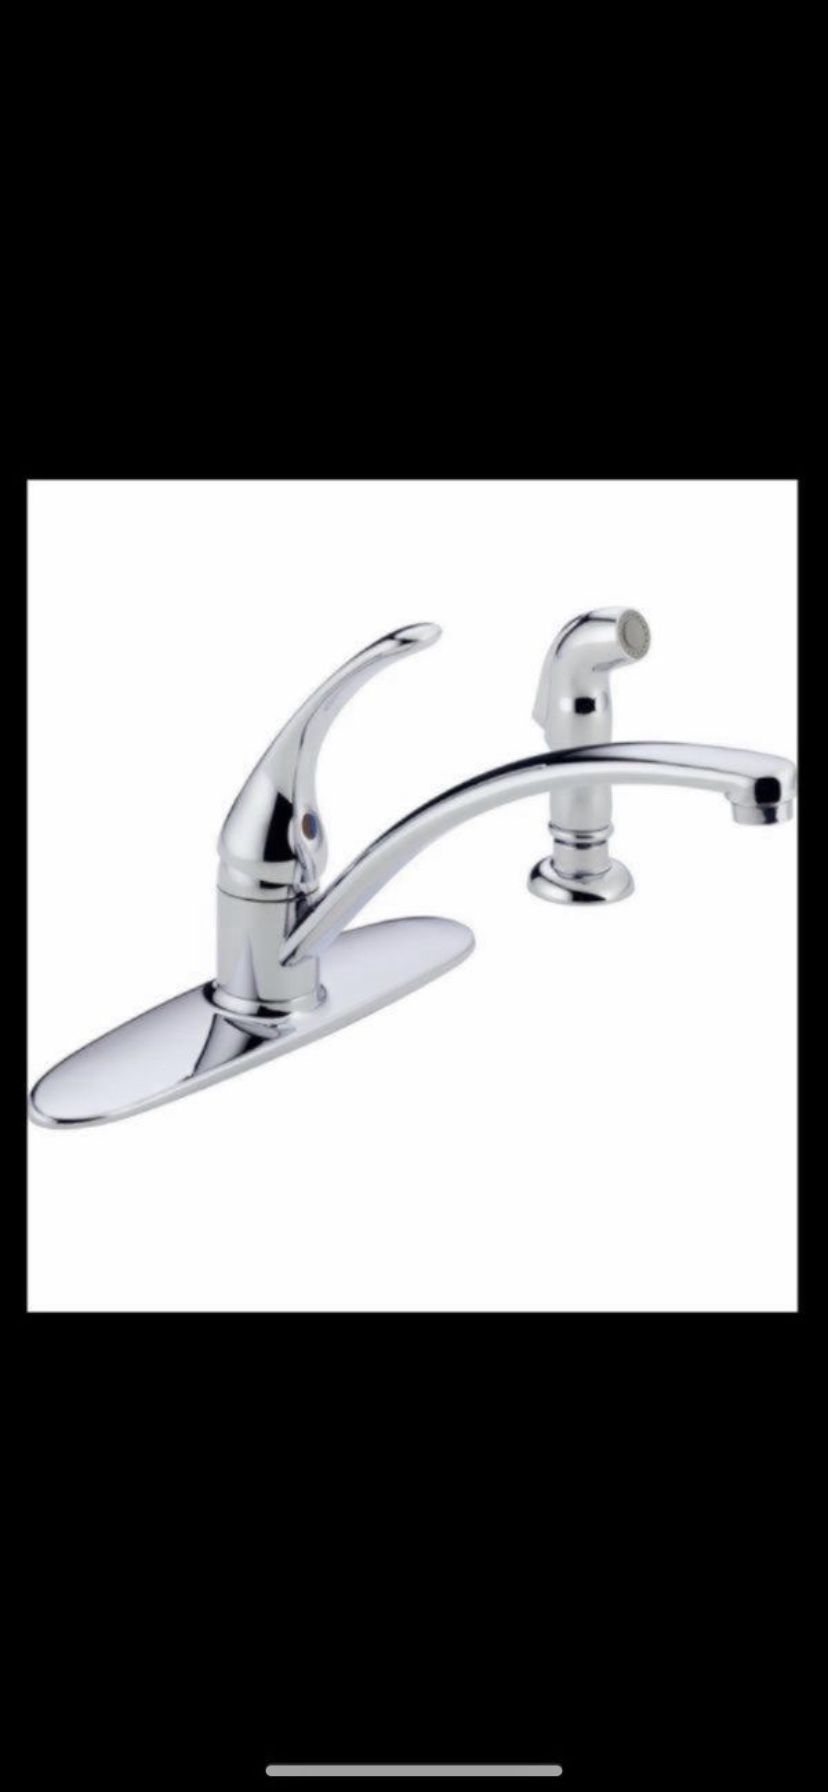 Delta kitchen faucet in chrome with side sprayer